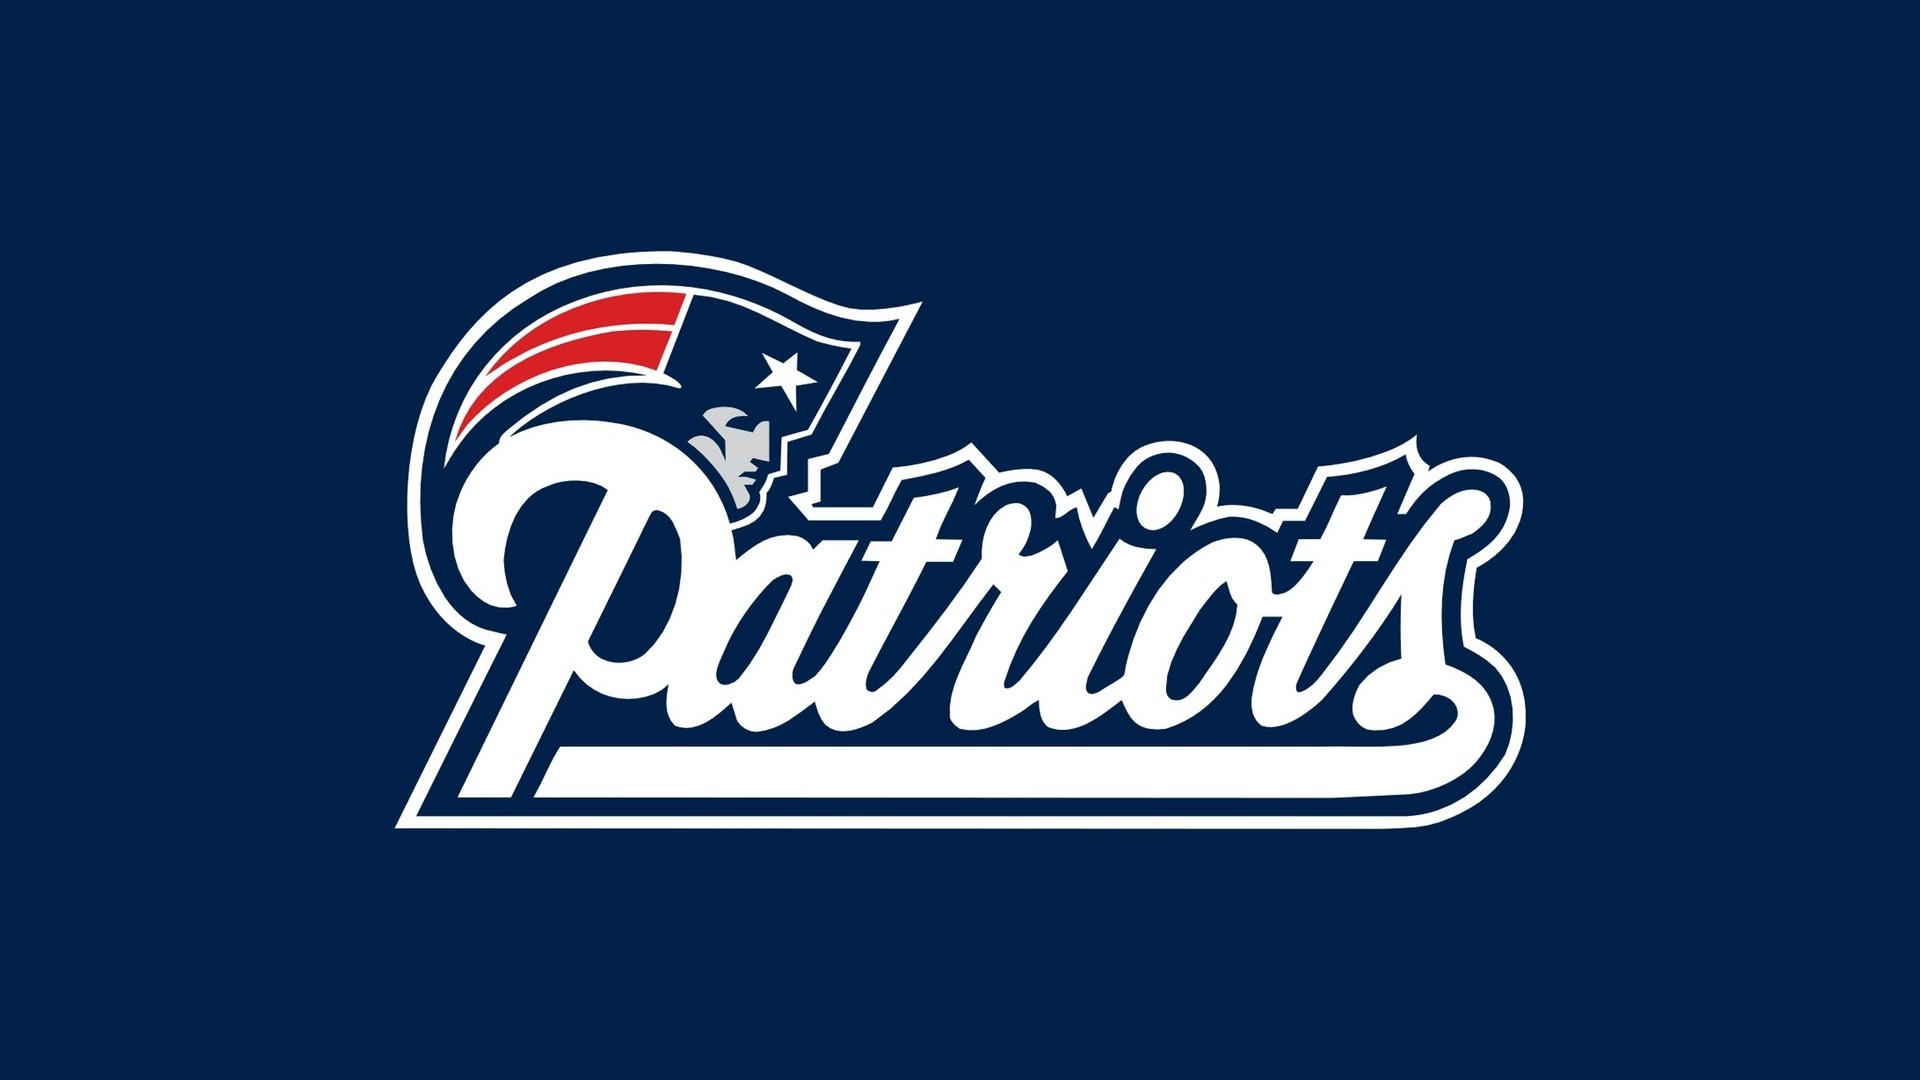 New England Patriots Mac Wallpaper with high-resolution 1920x1080 pixel. Download and set as wallpaper for Desktop Computer, Apple iPhone X, XS Max, XR, 8, 7, 6, SE, iPad, Android